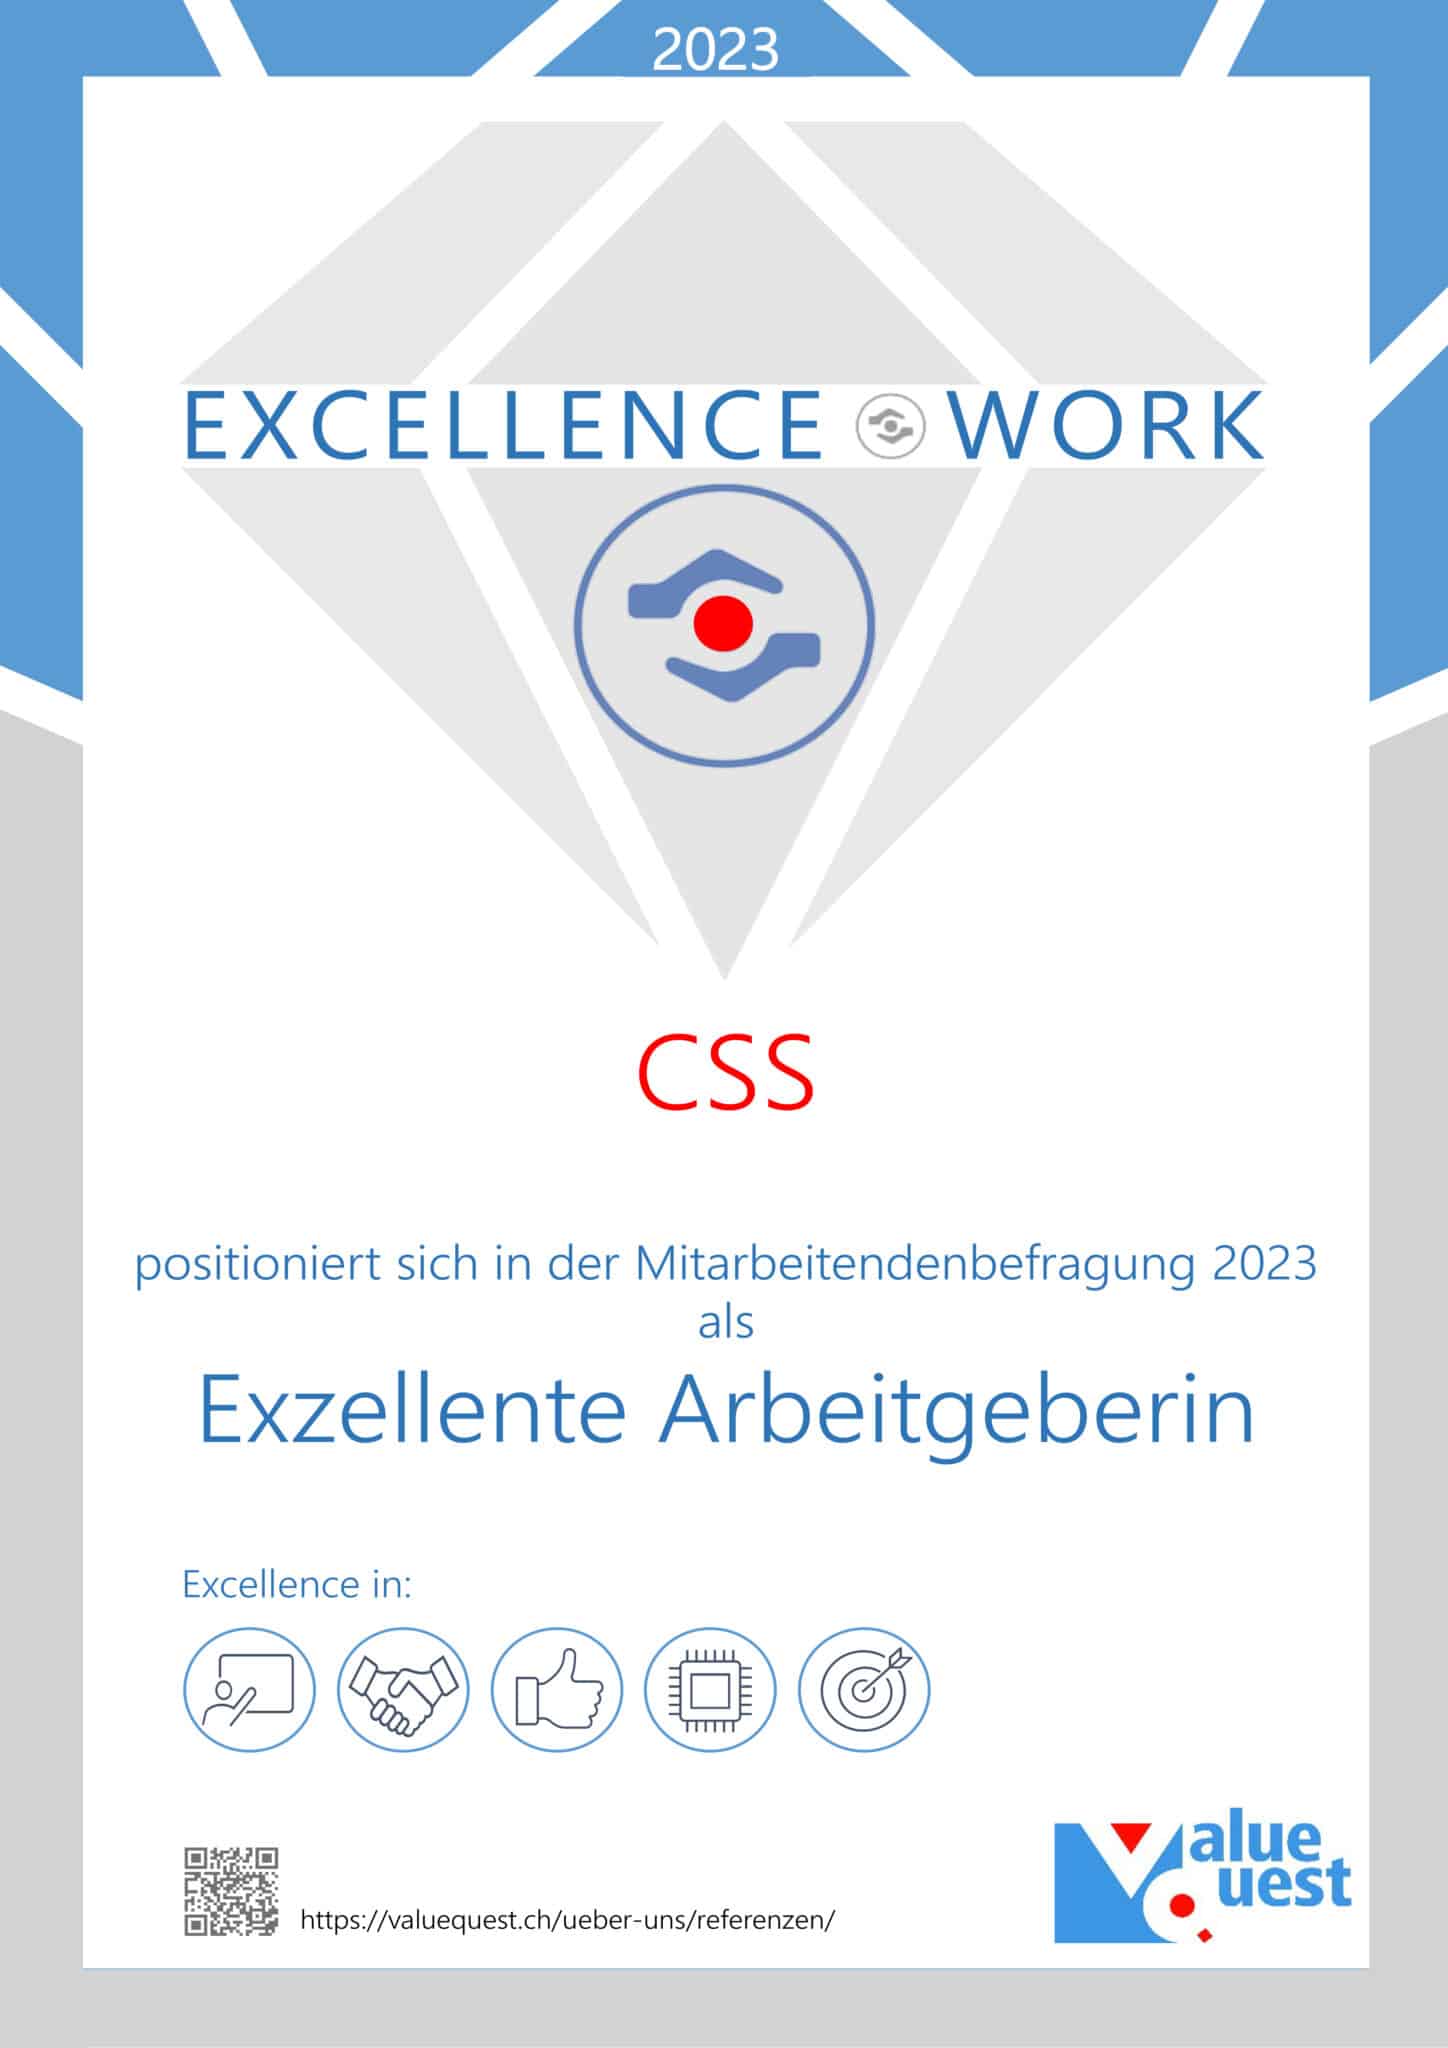 Excelence"Work CSS